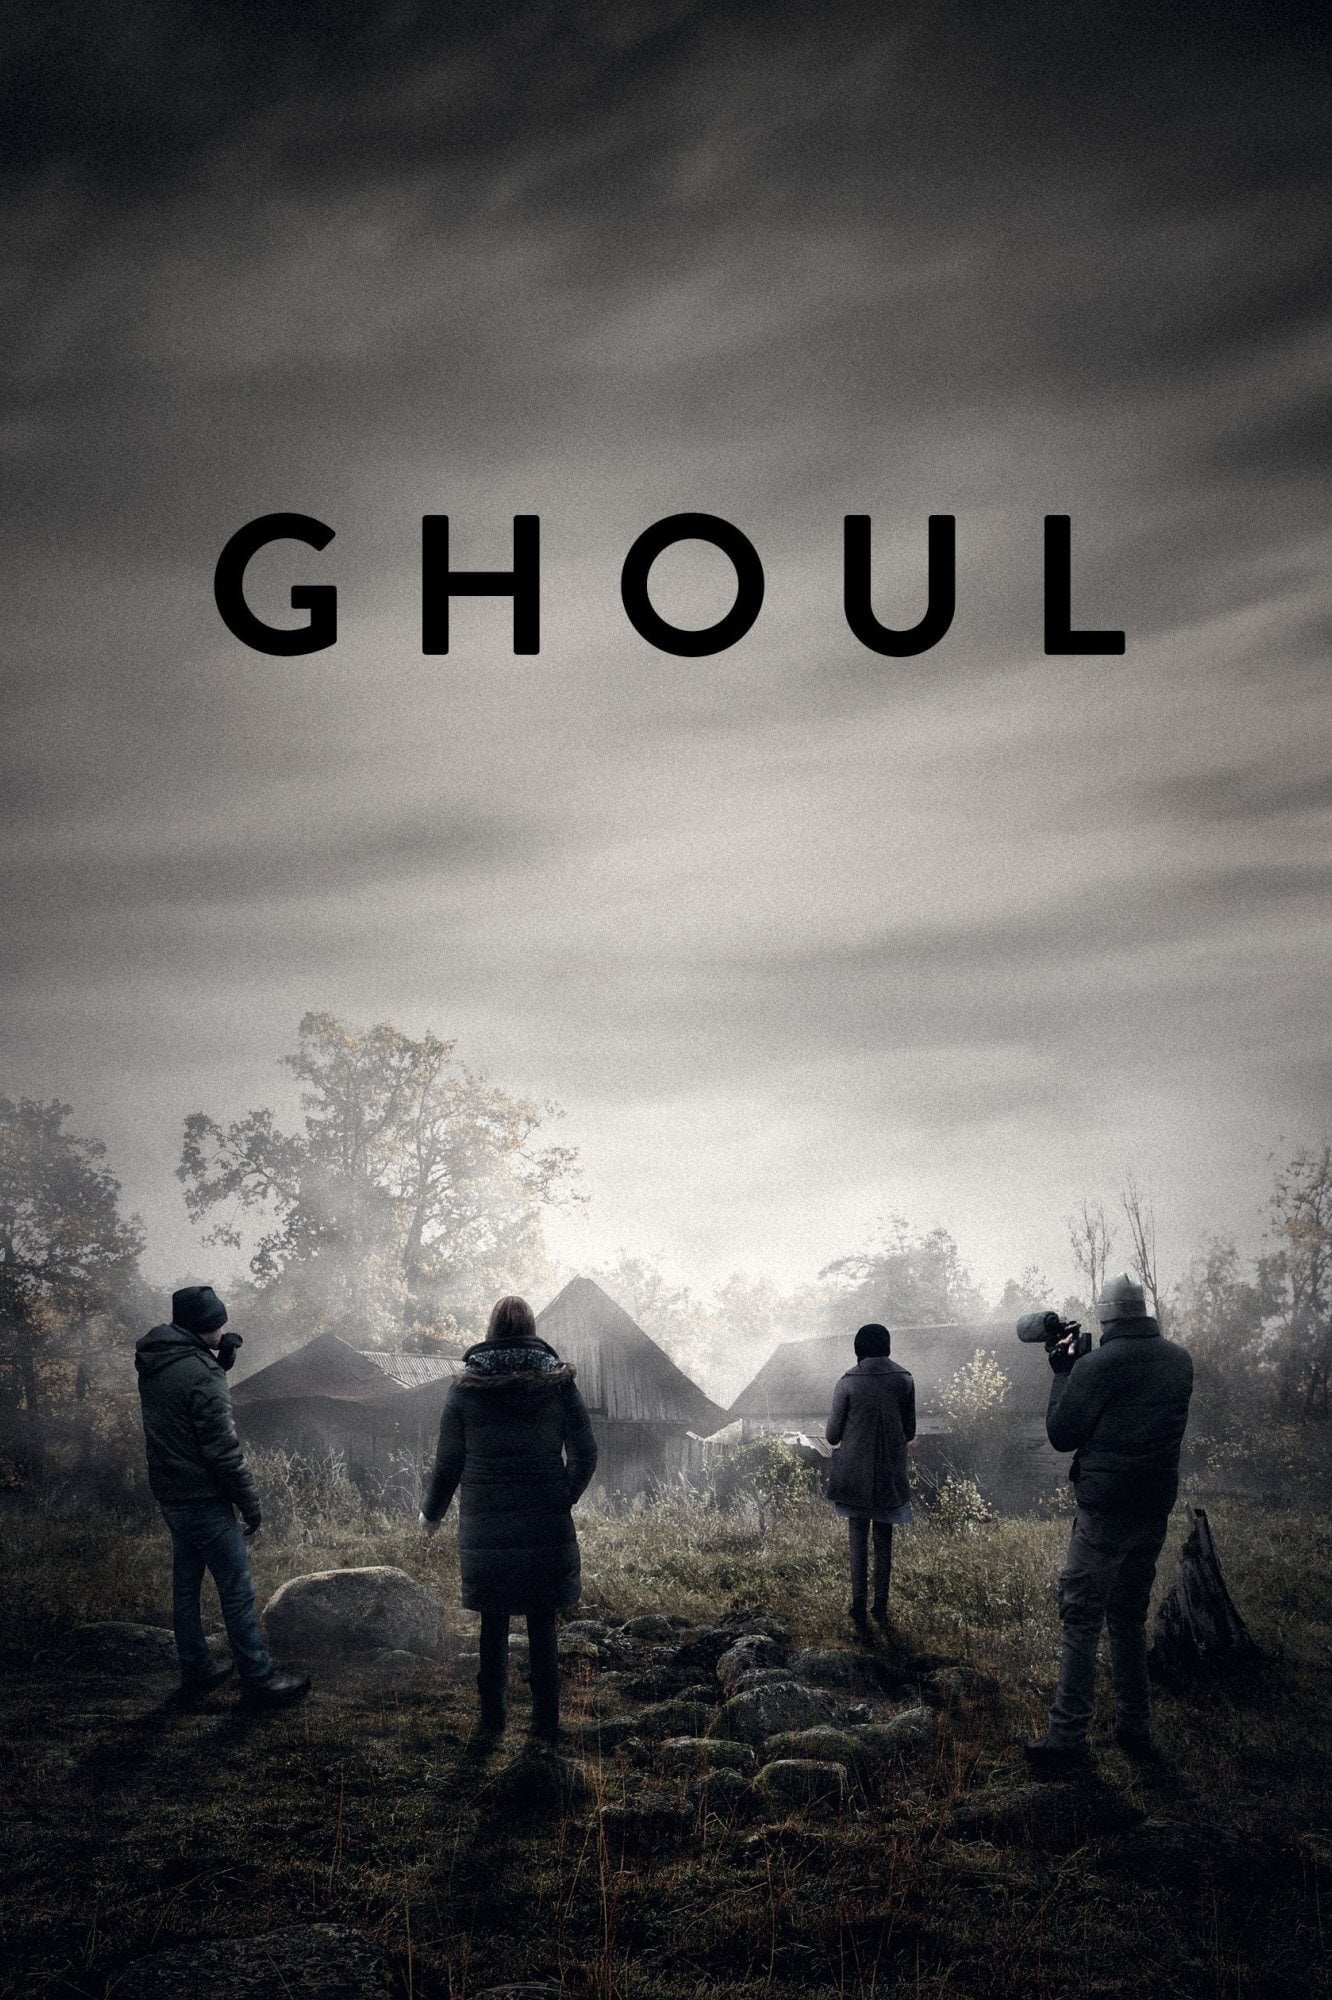 Ghoul (2015) 1080p mockumentary/found footage